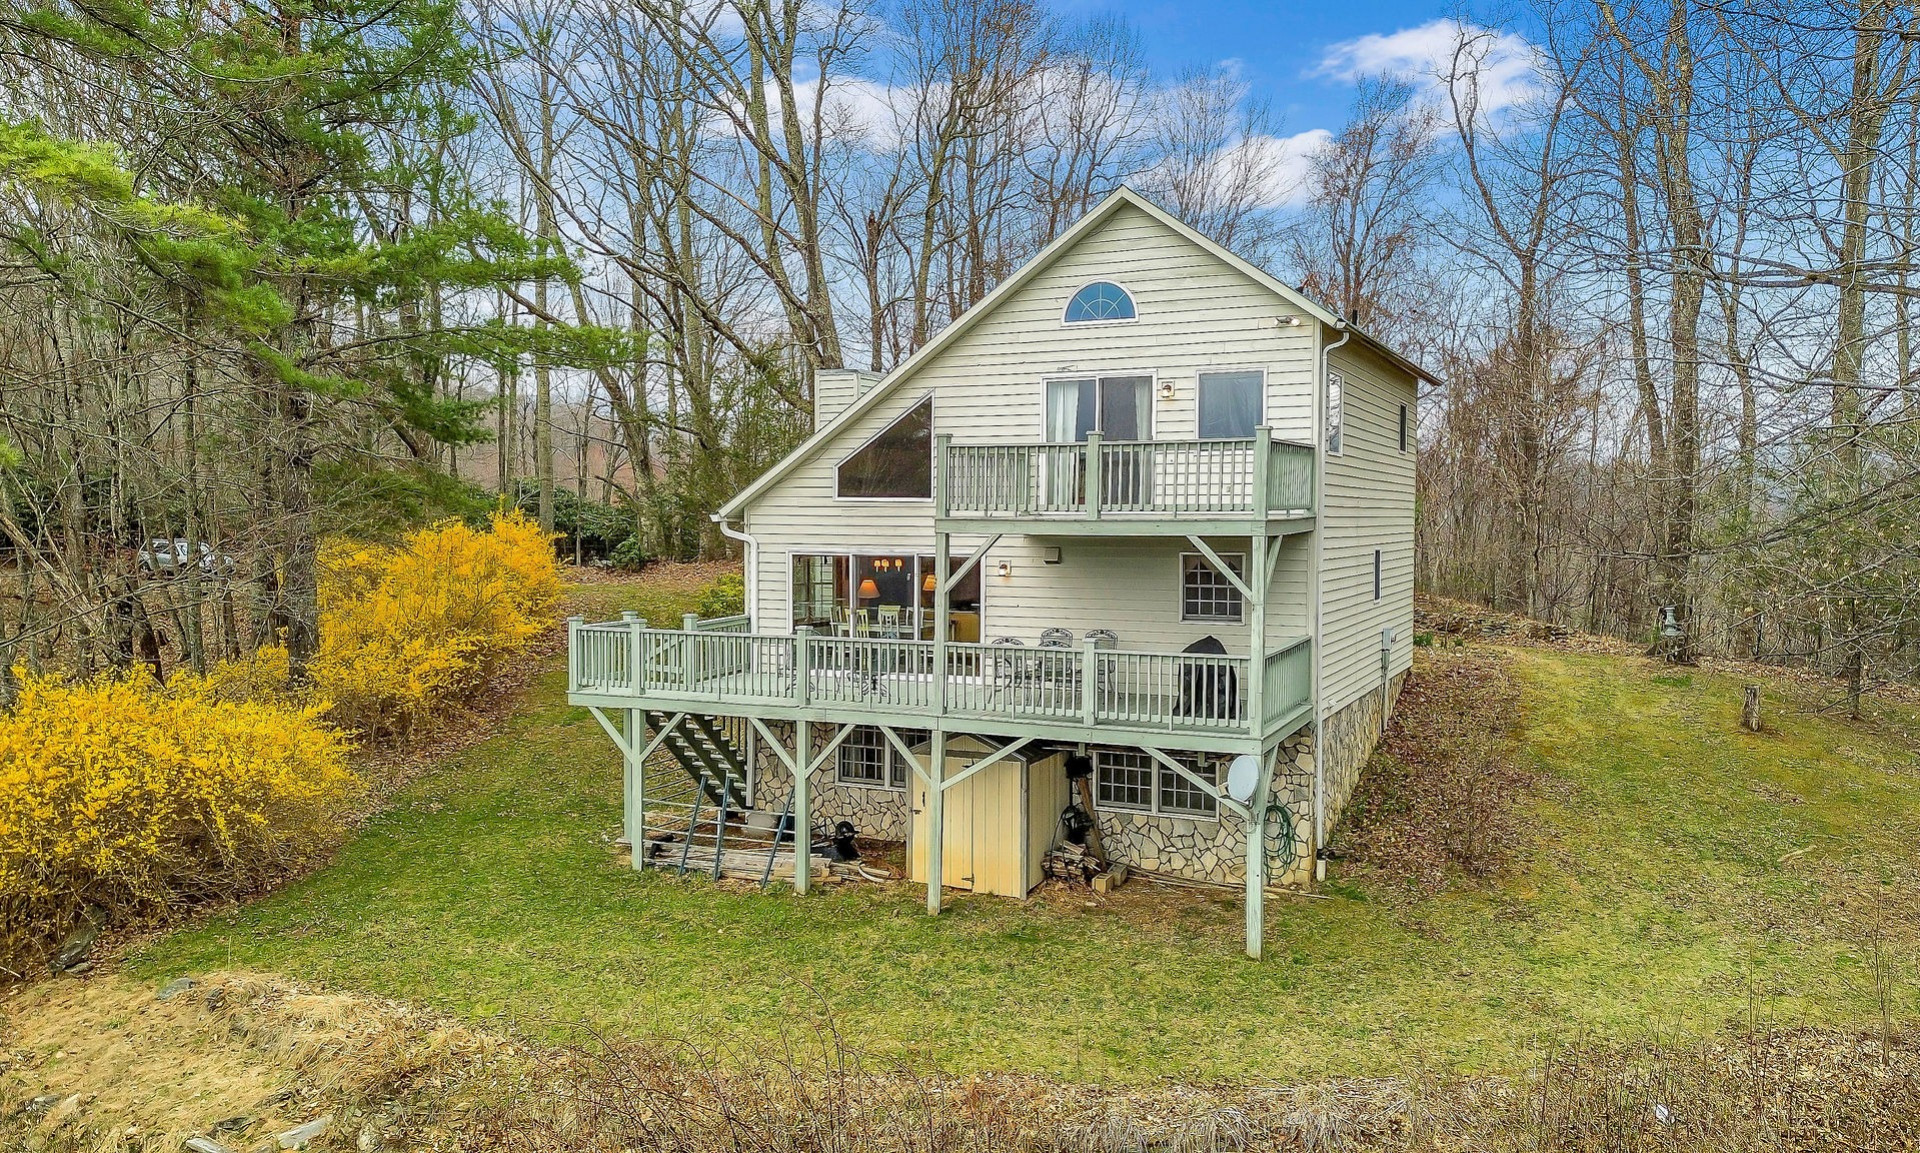 Two Bedroom, 3-bath furnished cottage in the Blue Ridge Mountains